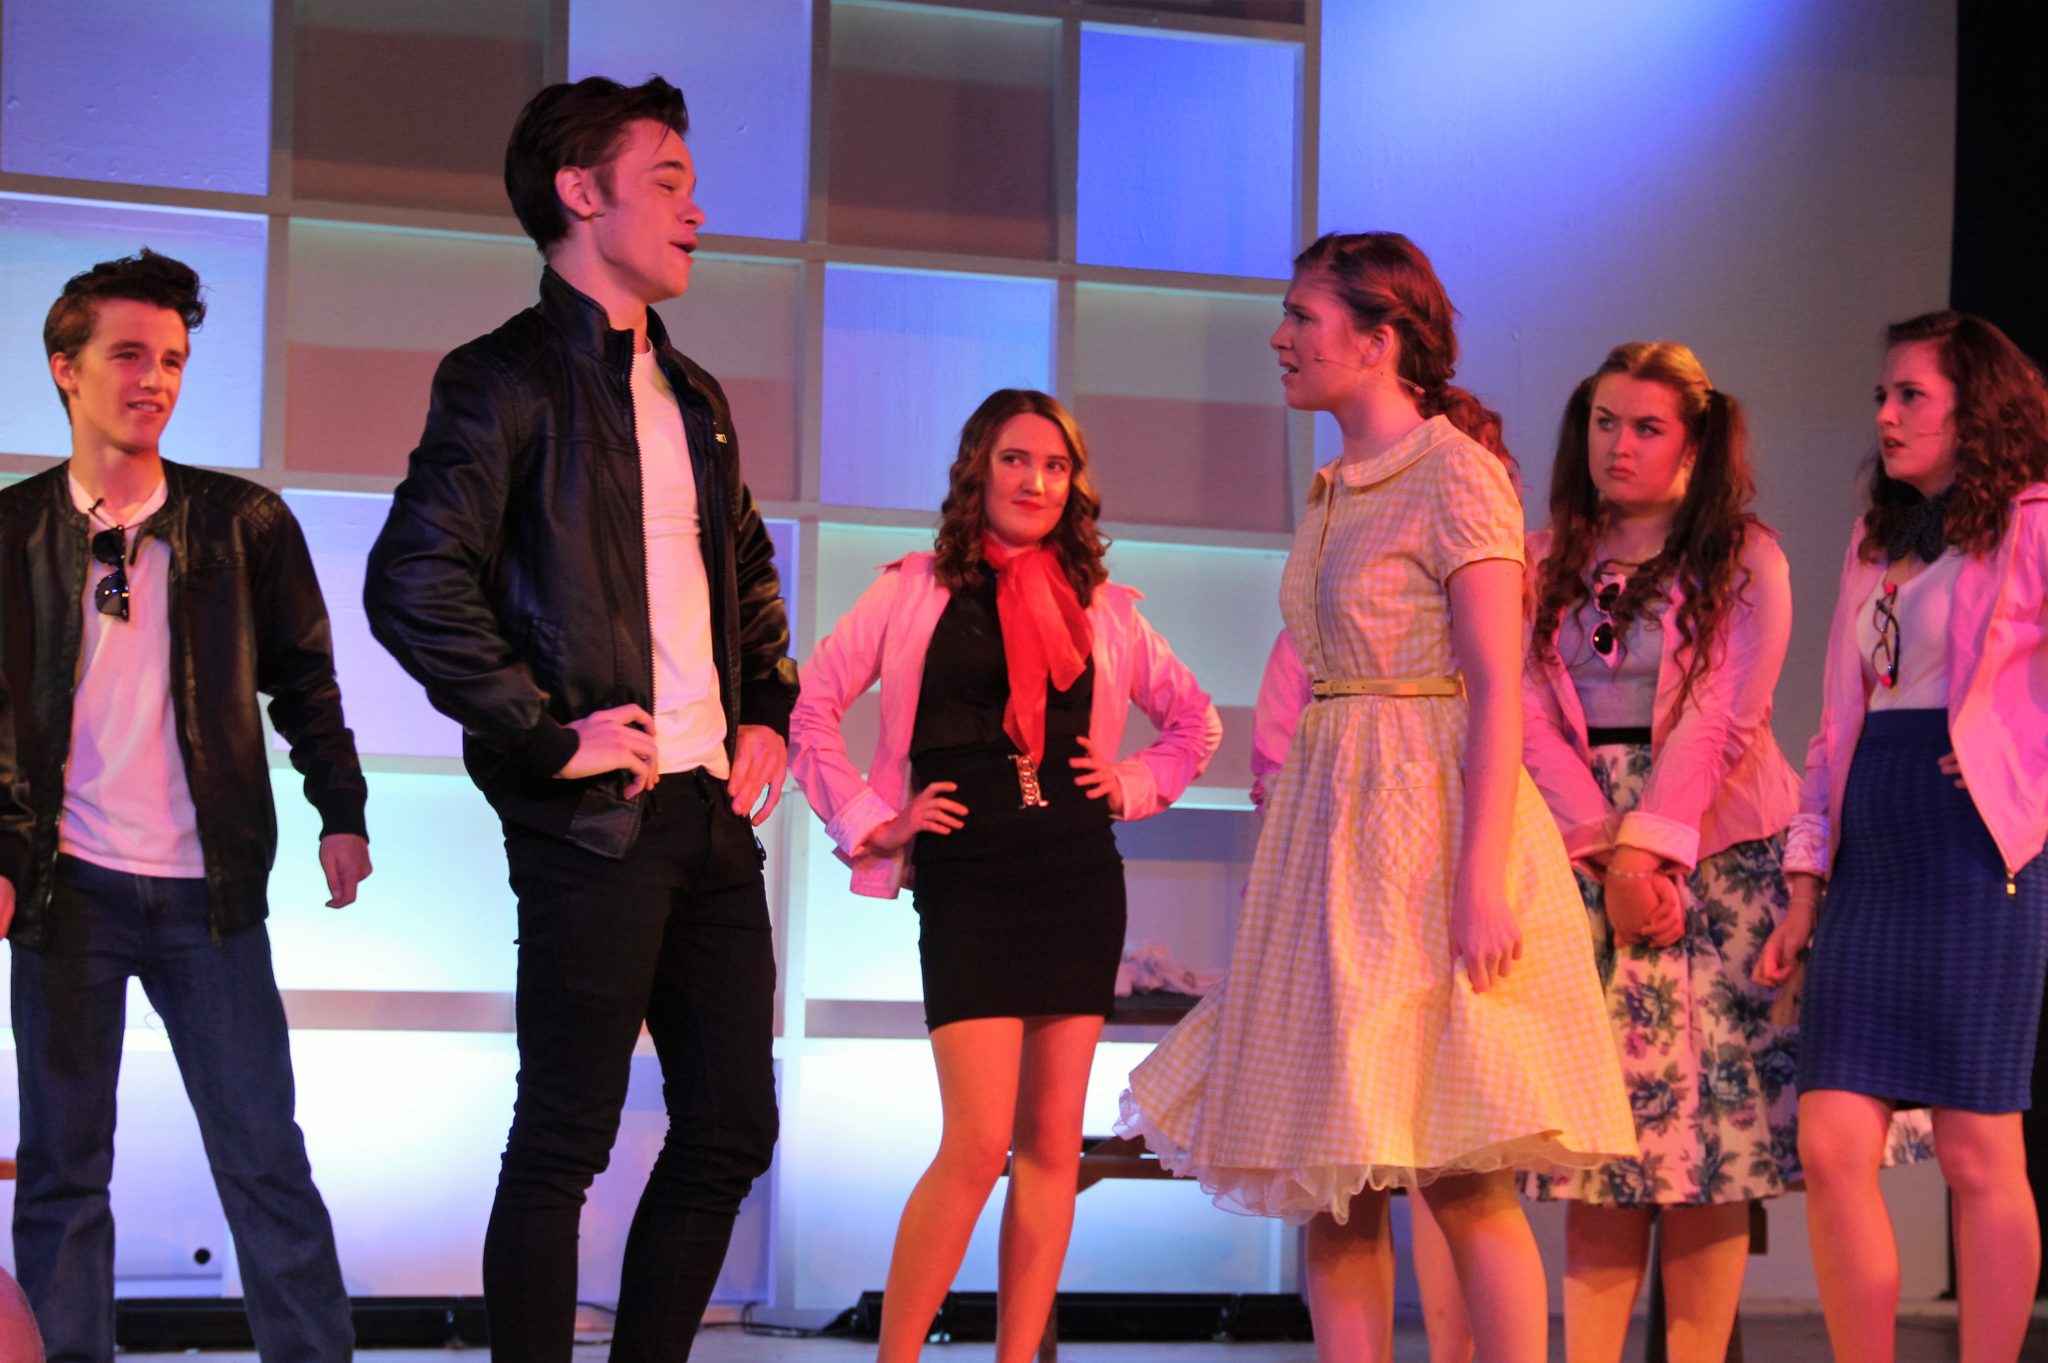 Danny and Sandy in Croesyceiliog School's production of Grease